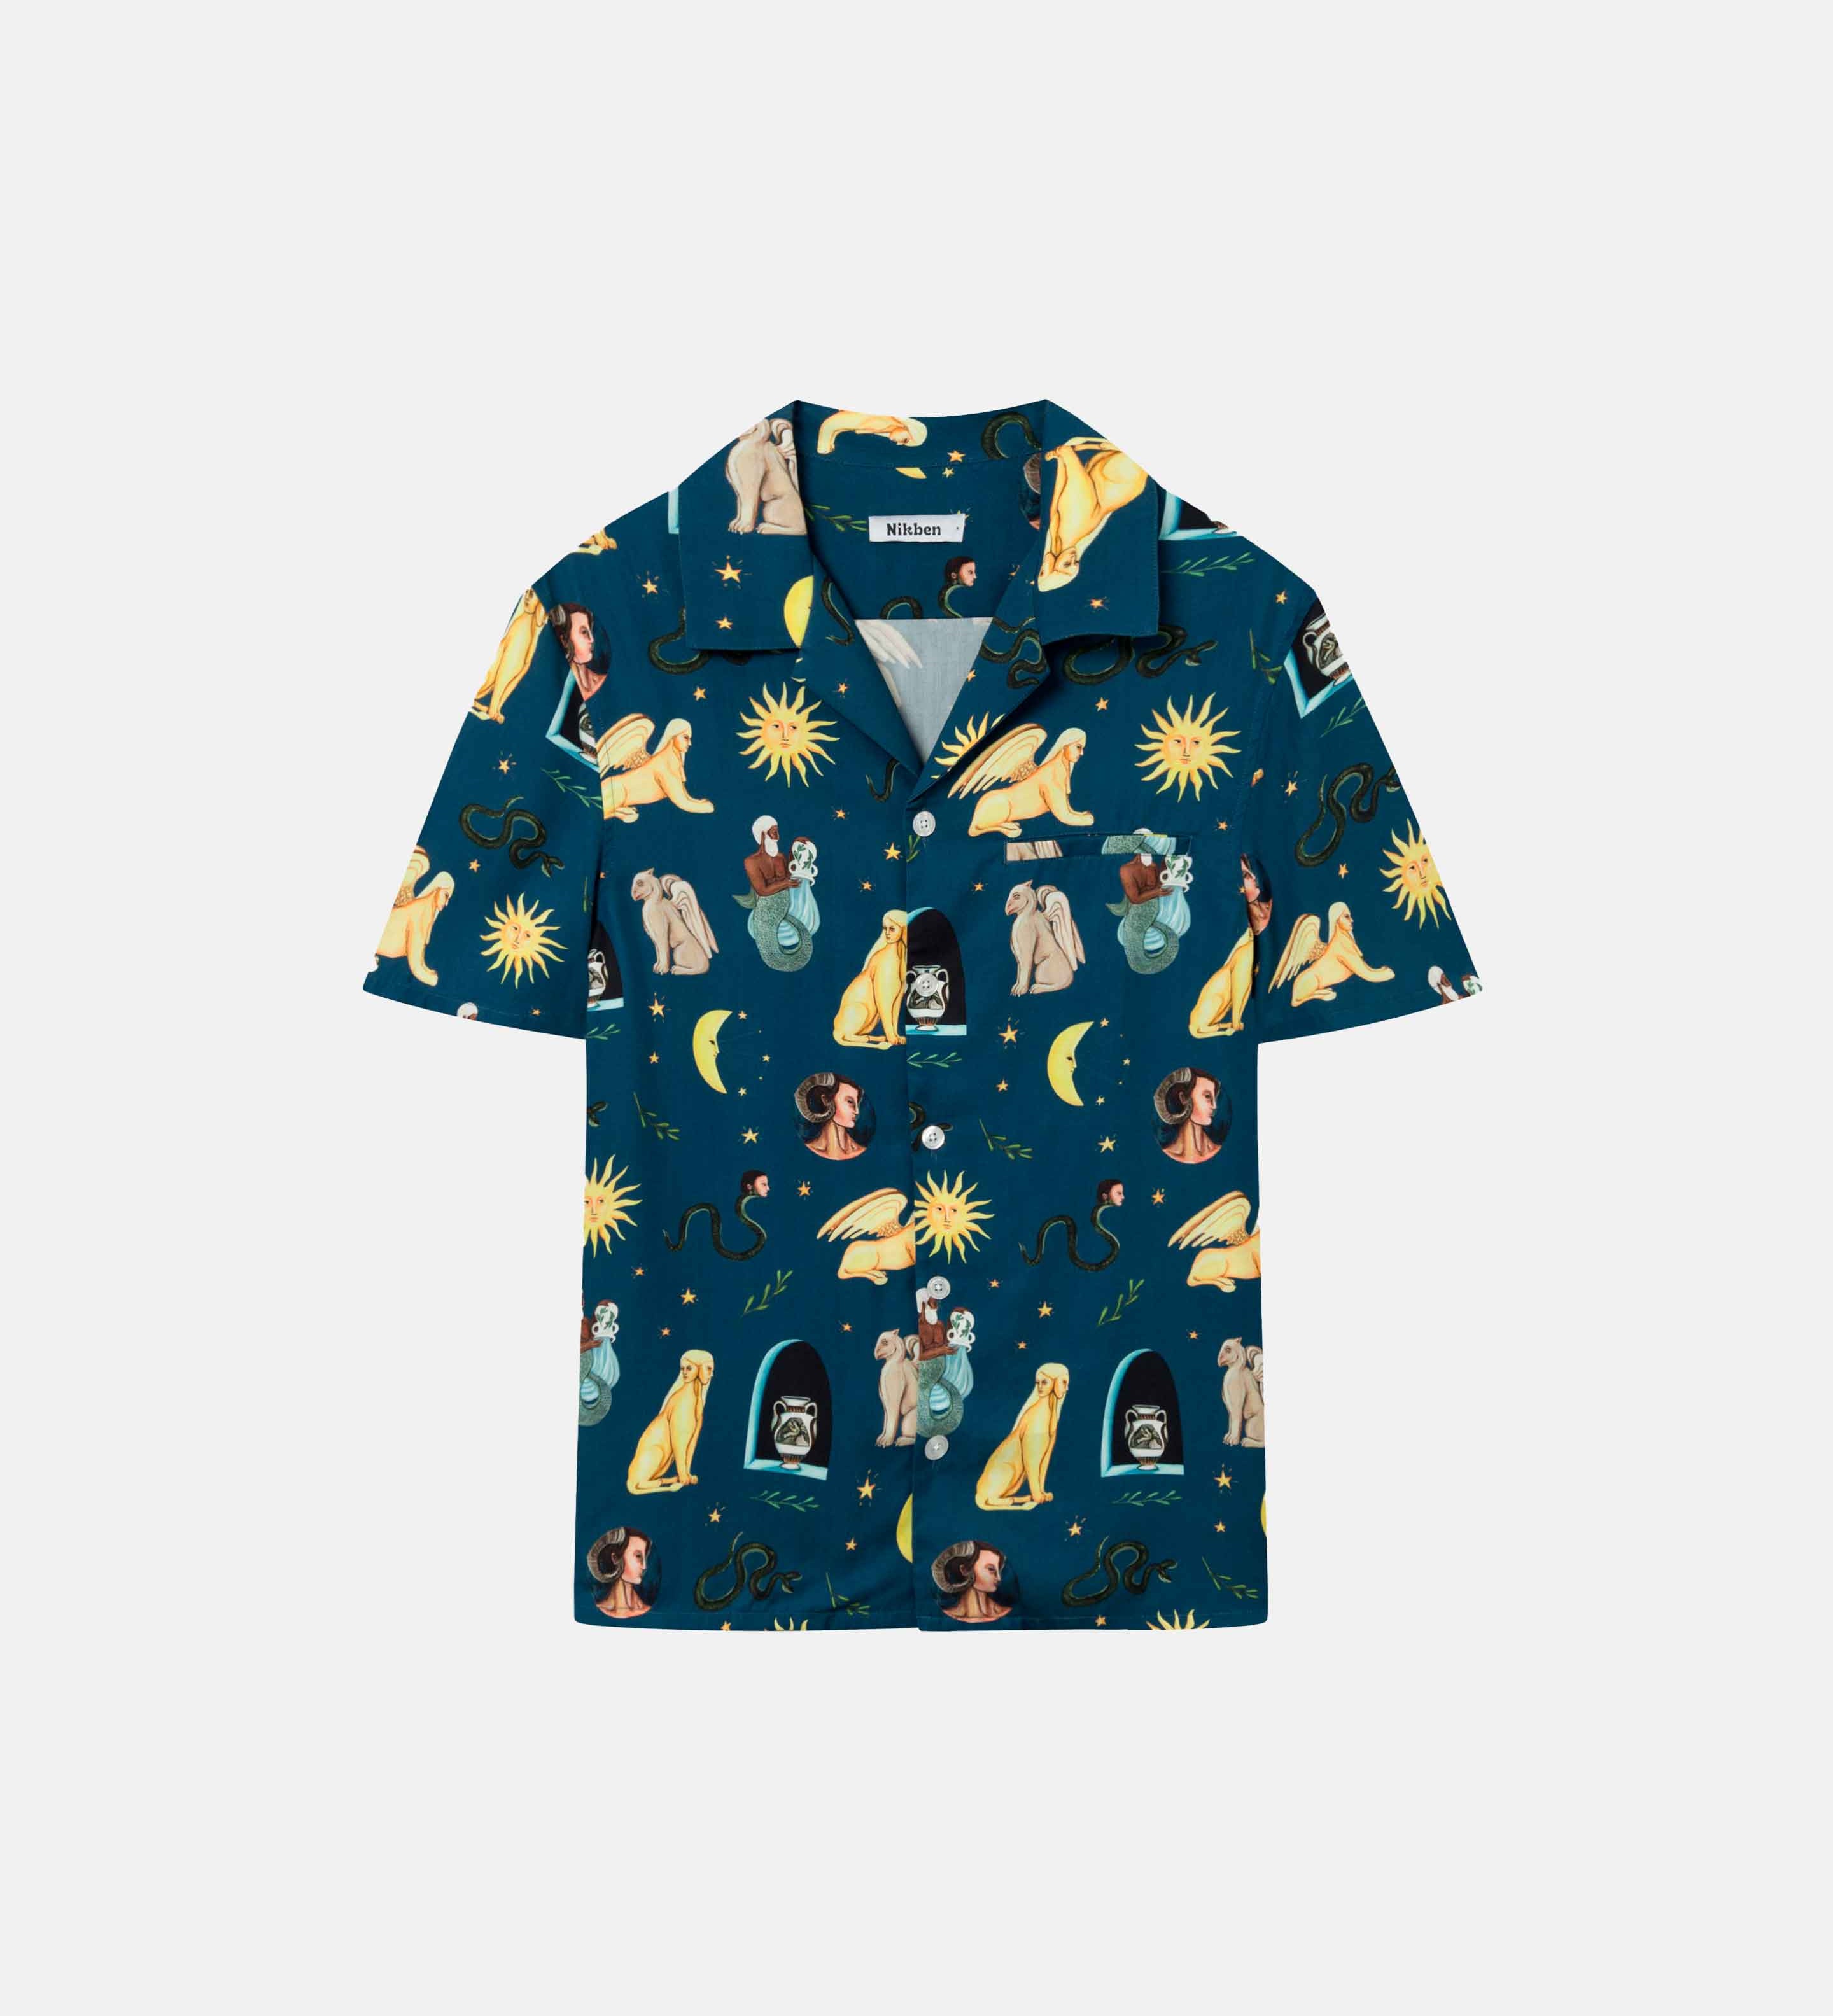 Navy short-sleeved vacation shirt with a multi-colored graphic pattern, open collar, one breast pocket, and button closure.